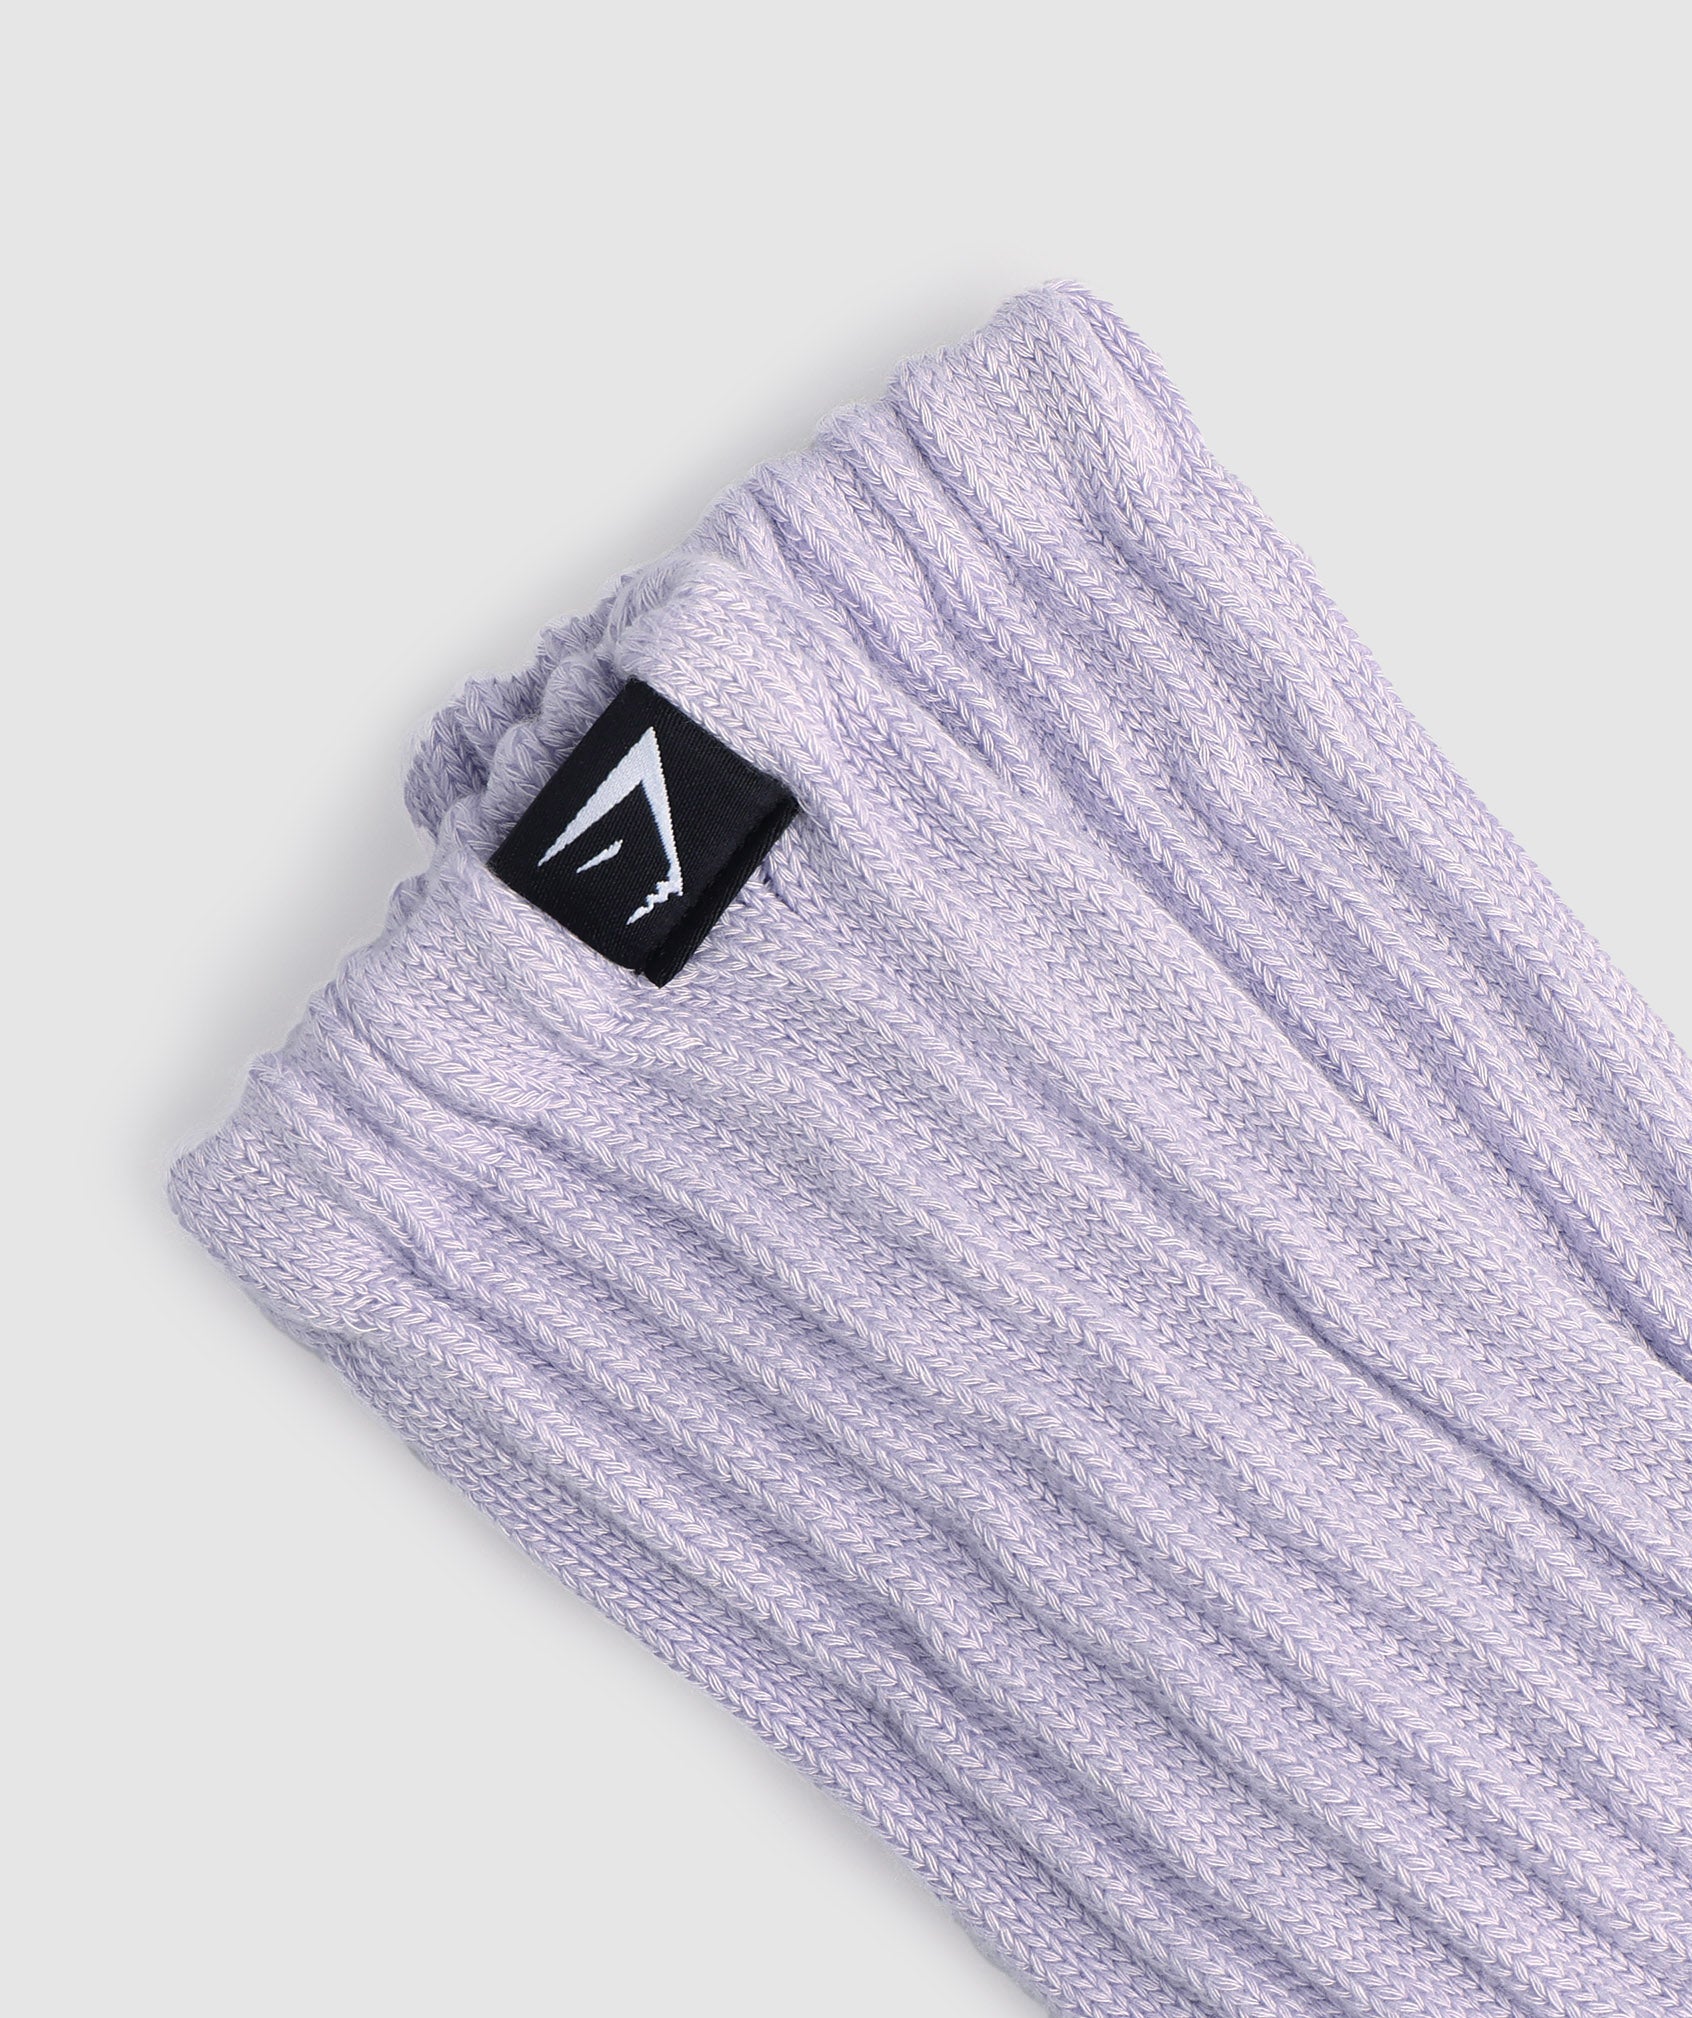 Comfy Rest Day Socks in Soft Lilac - view 2